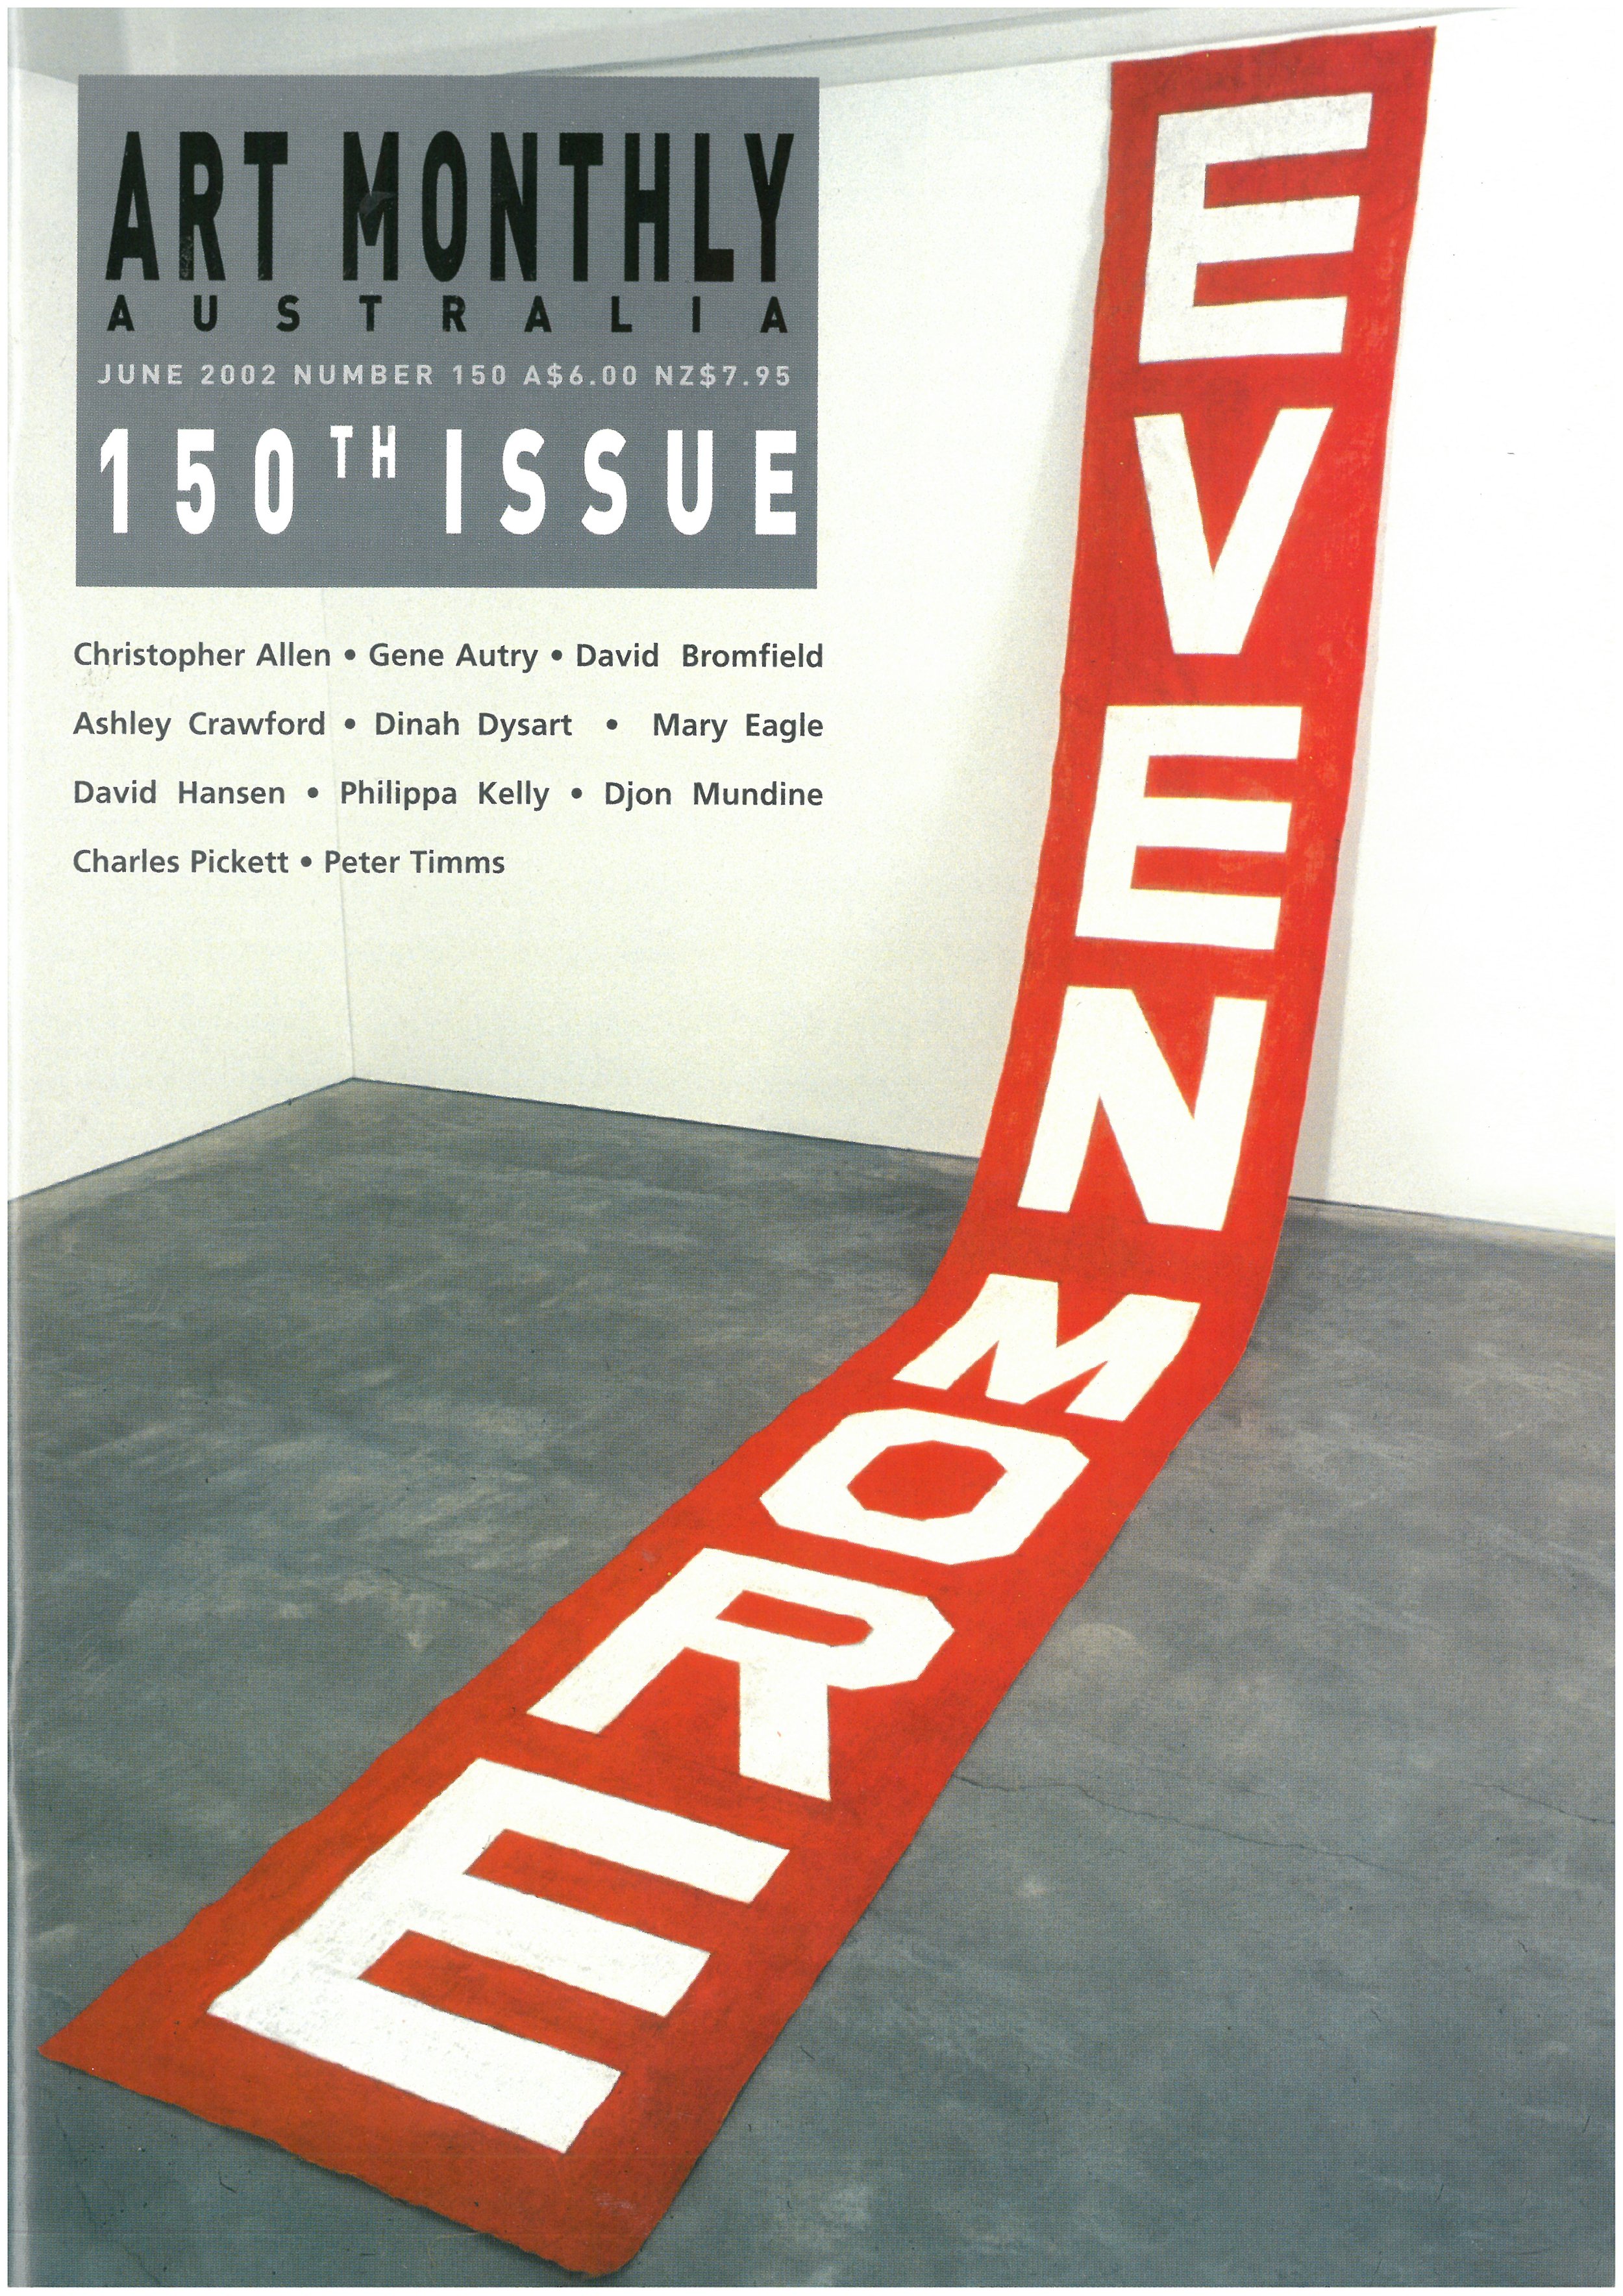  Issue 150 June 2002